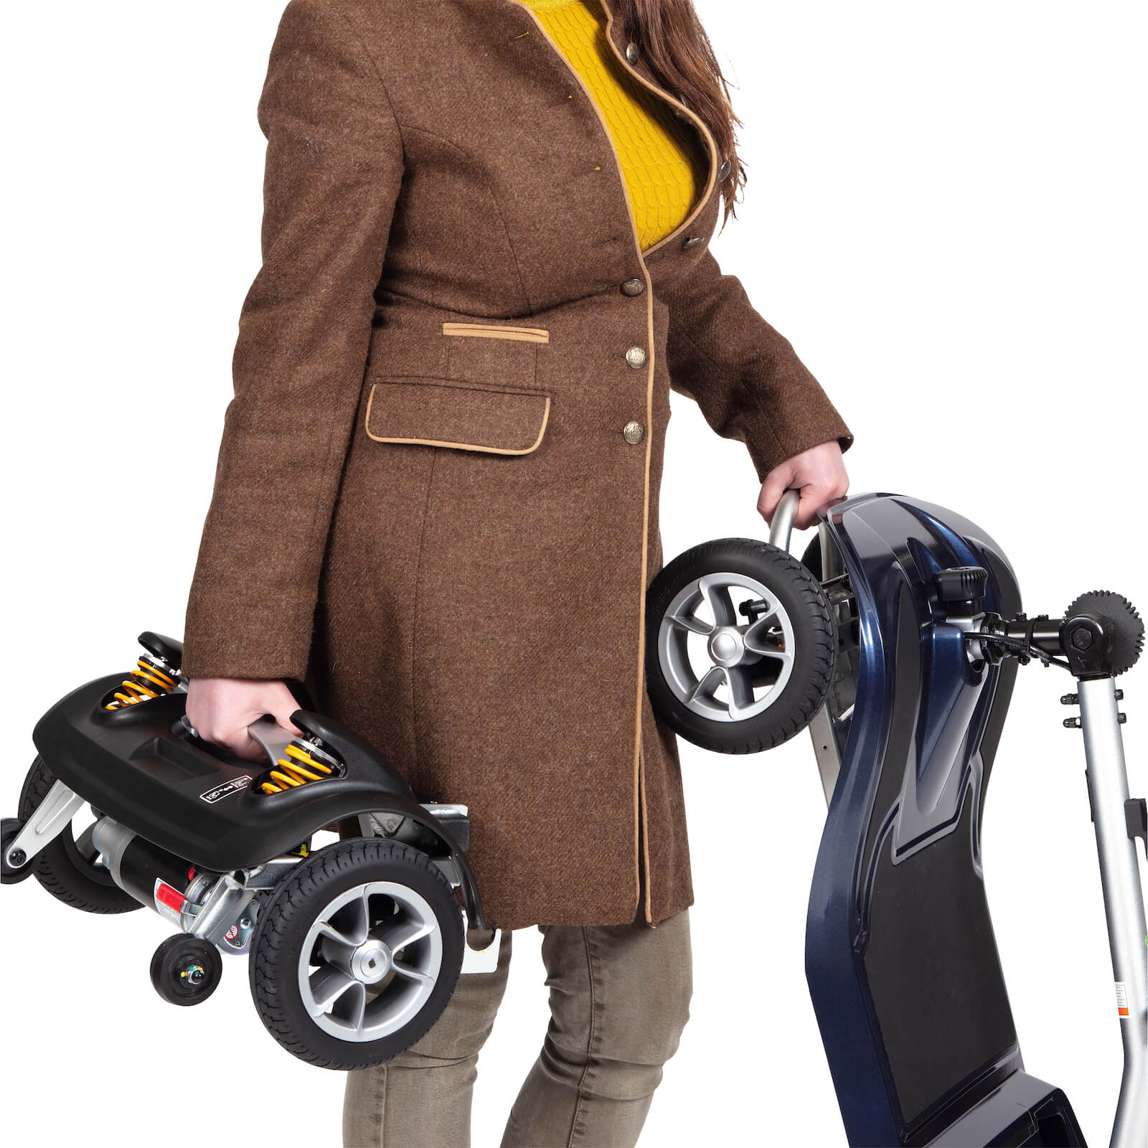 Drive AstroLite Scooter - 10 Ah (airline friendly) Battery Model